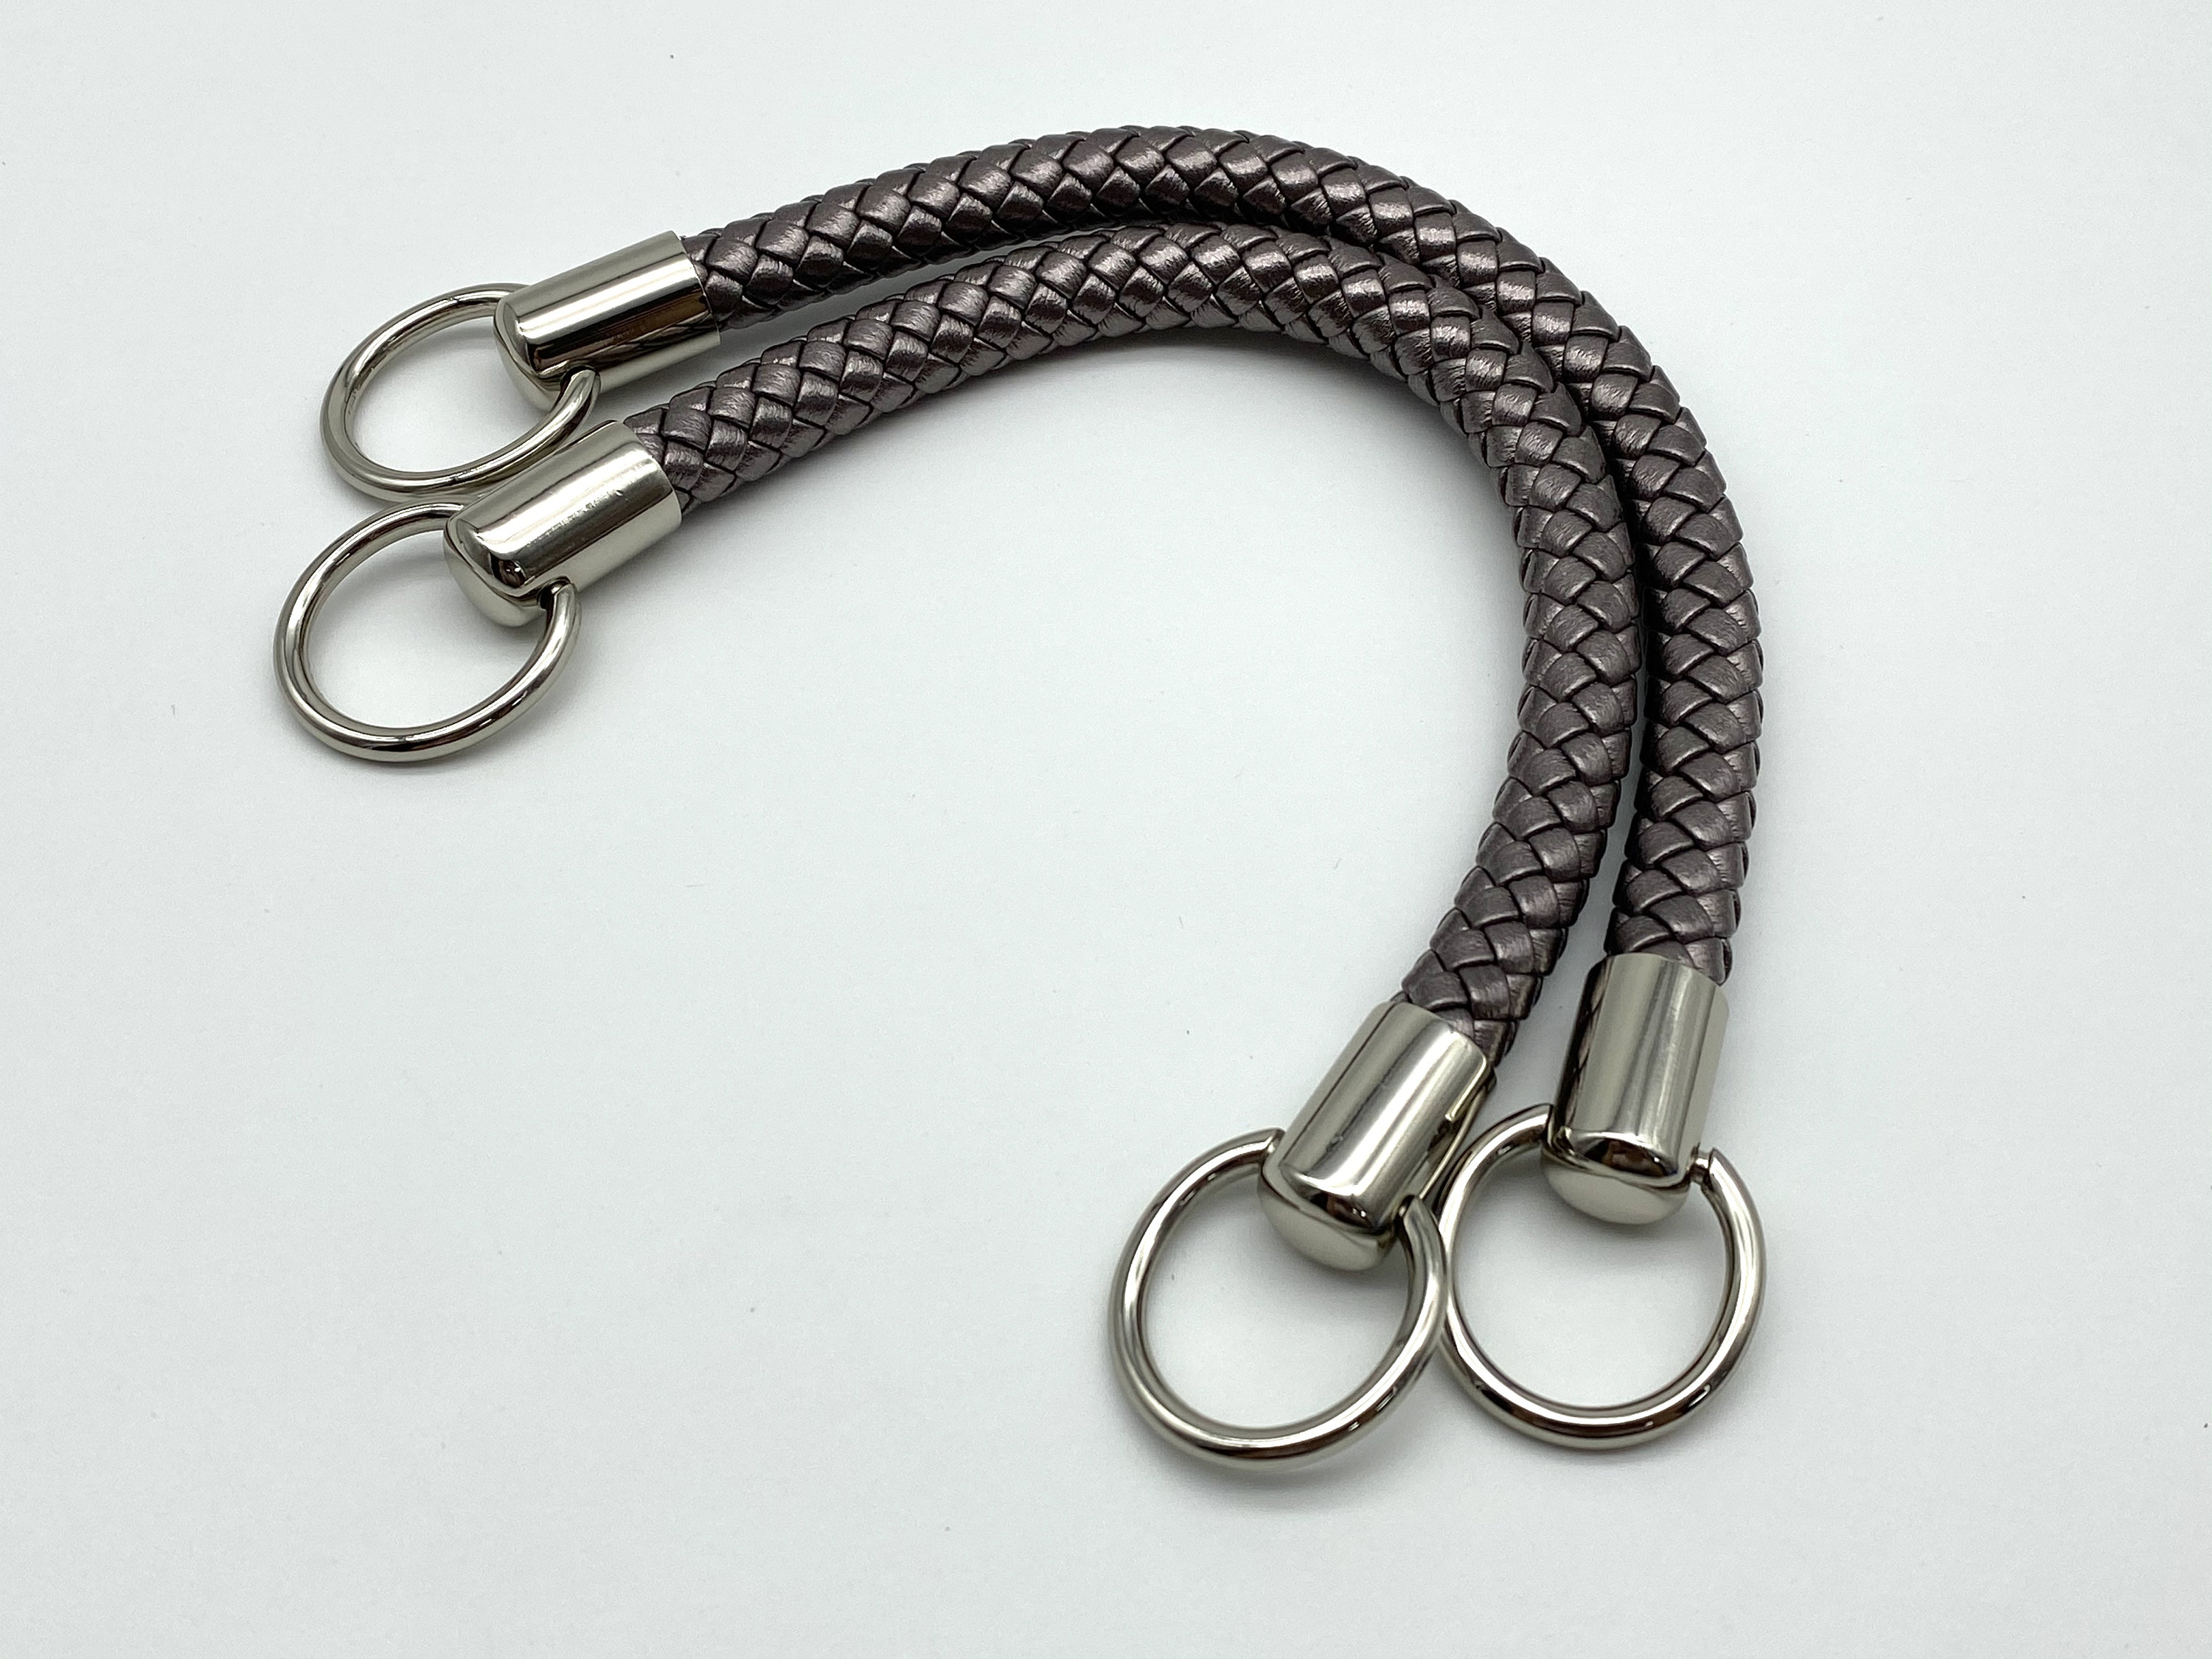 Pair of 12 Inch 30cm Braided Faux PU Leather Cope Bag Purse Handles  Replacement Brown Red Black Gray Gold Nickel Hardware 